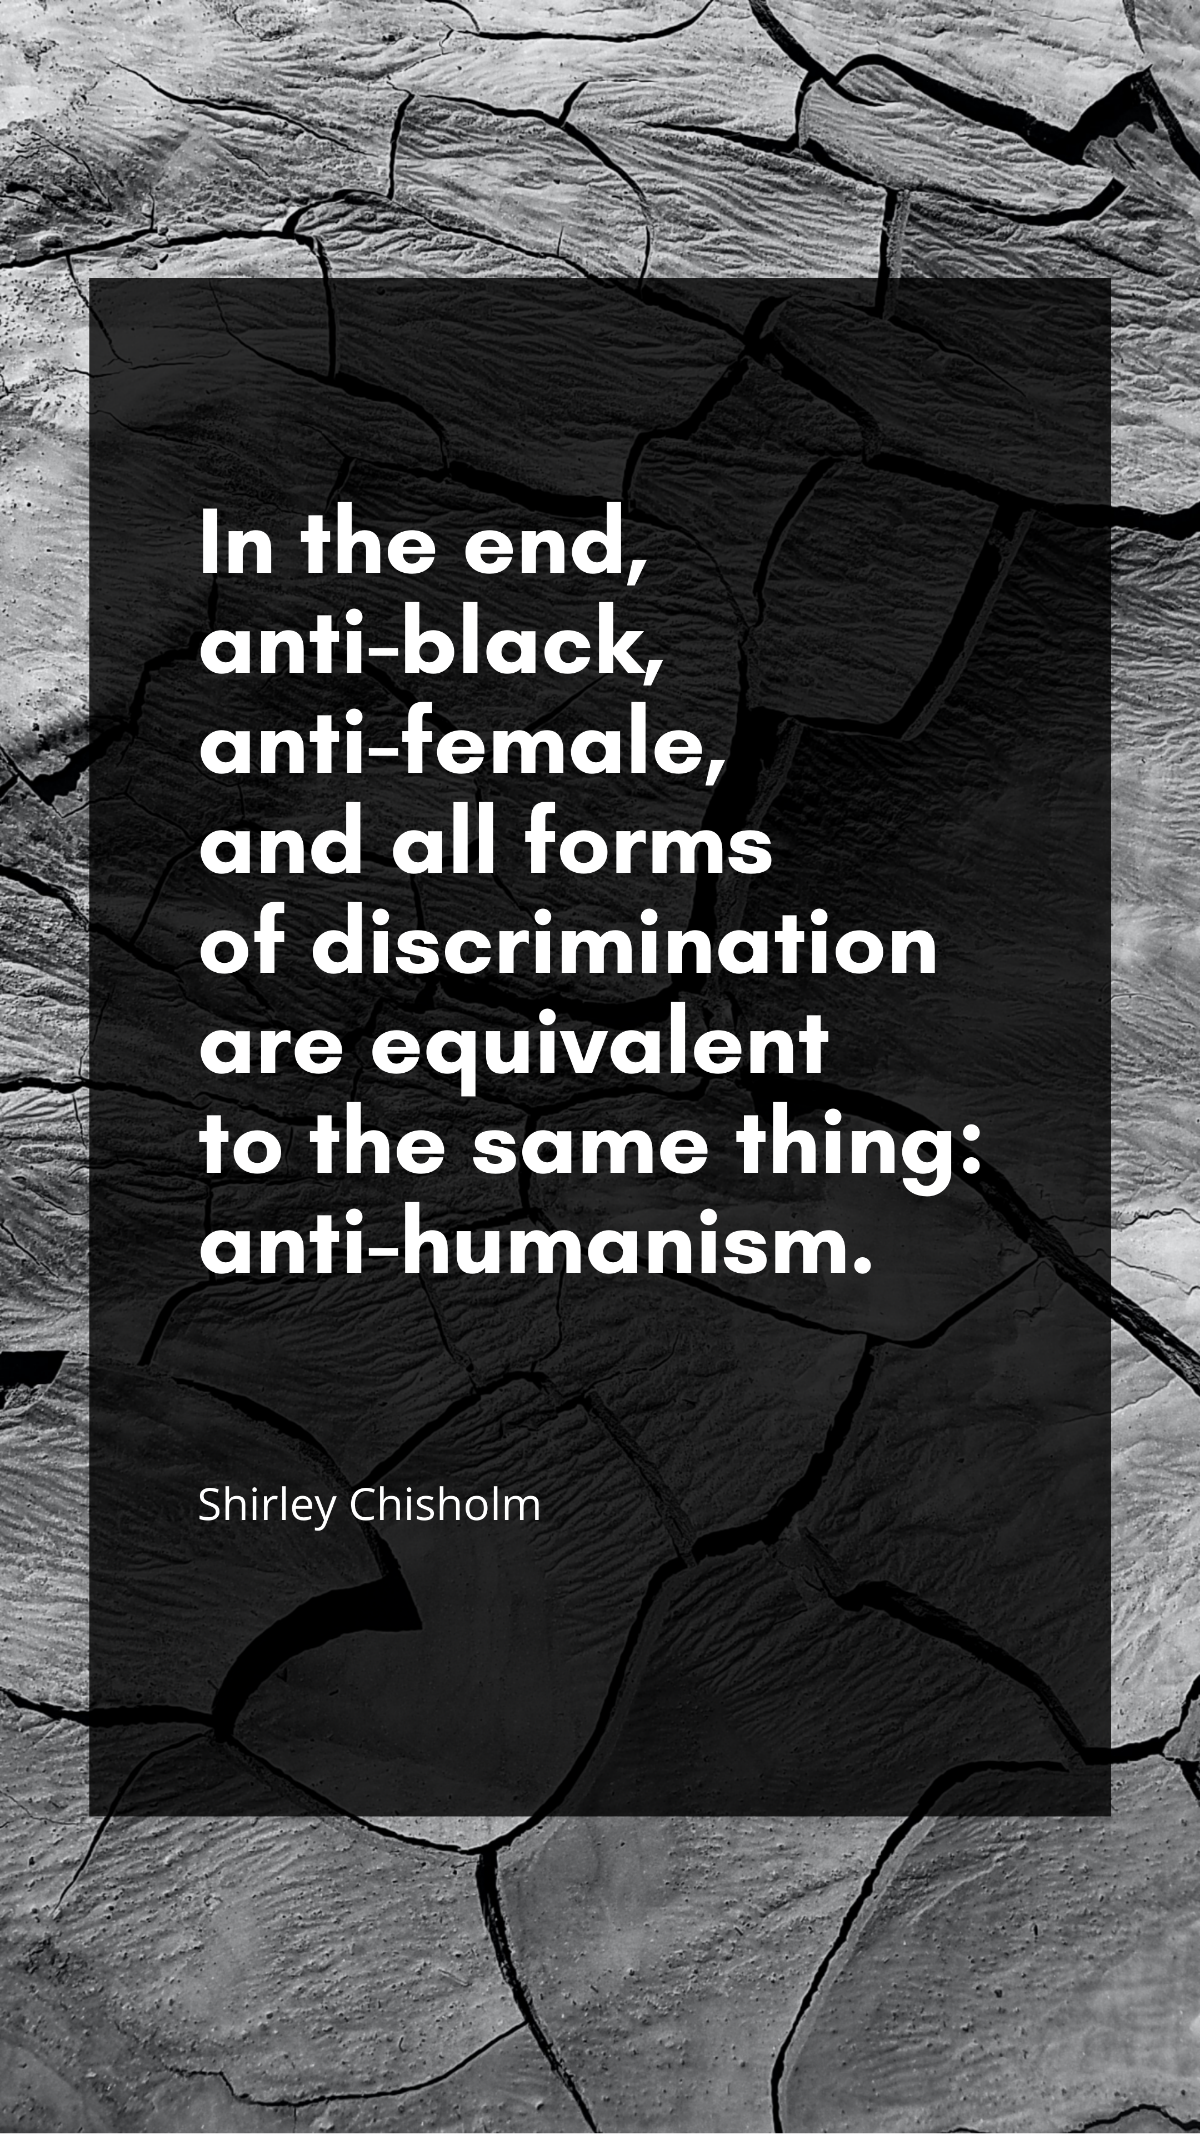 Shirley Chisholm - In the end, anti-black, anti-female, and all forms of discrimination are equivalent to the same thing: anti-humanism. Template